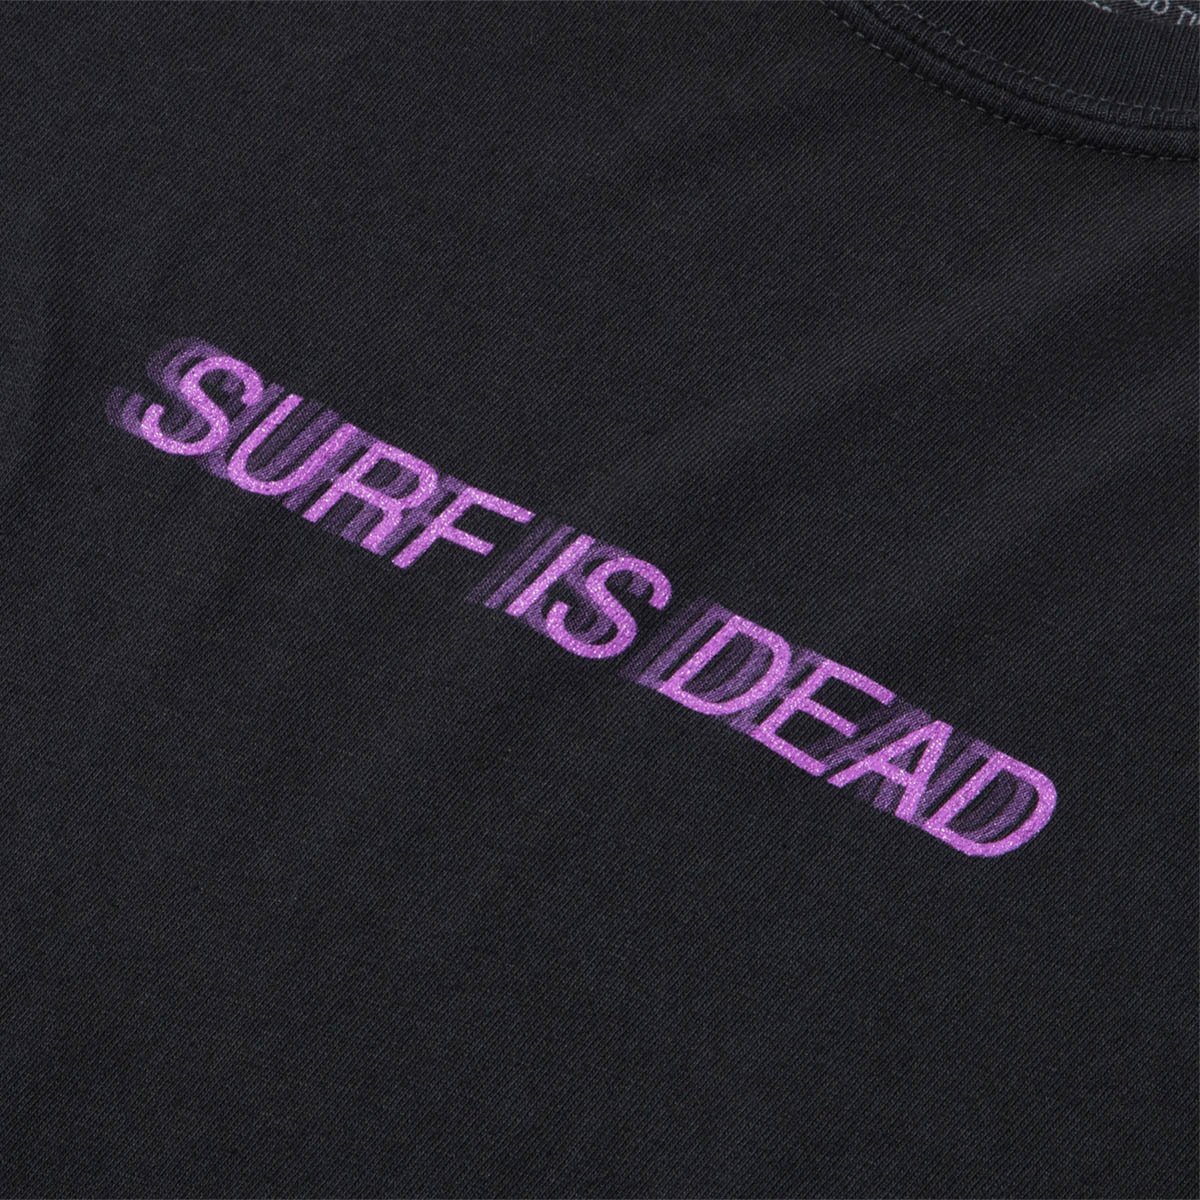 pronto surf is dead